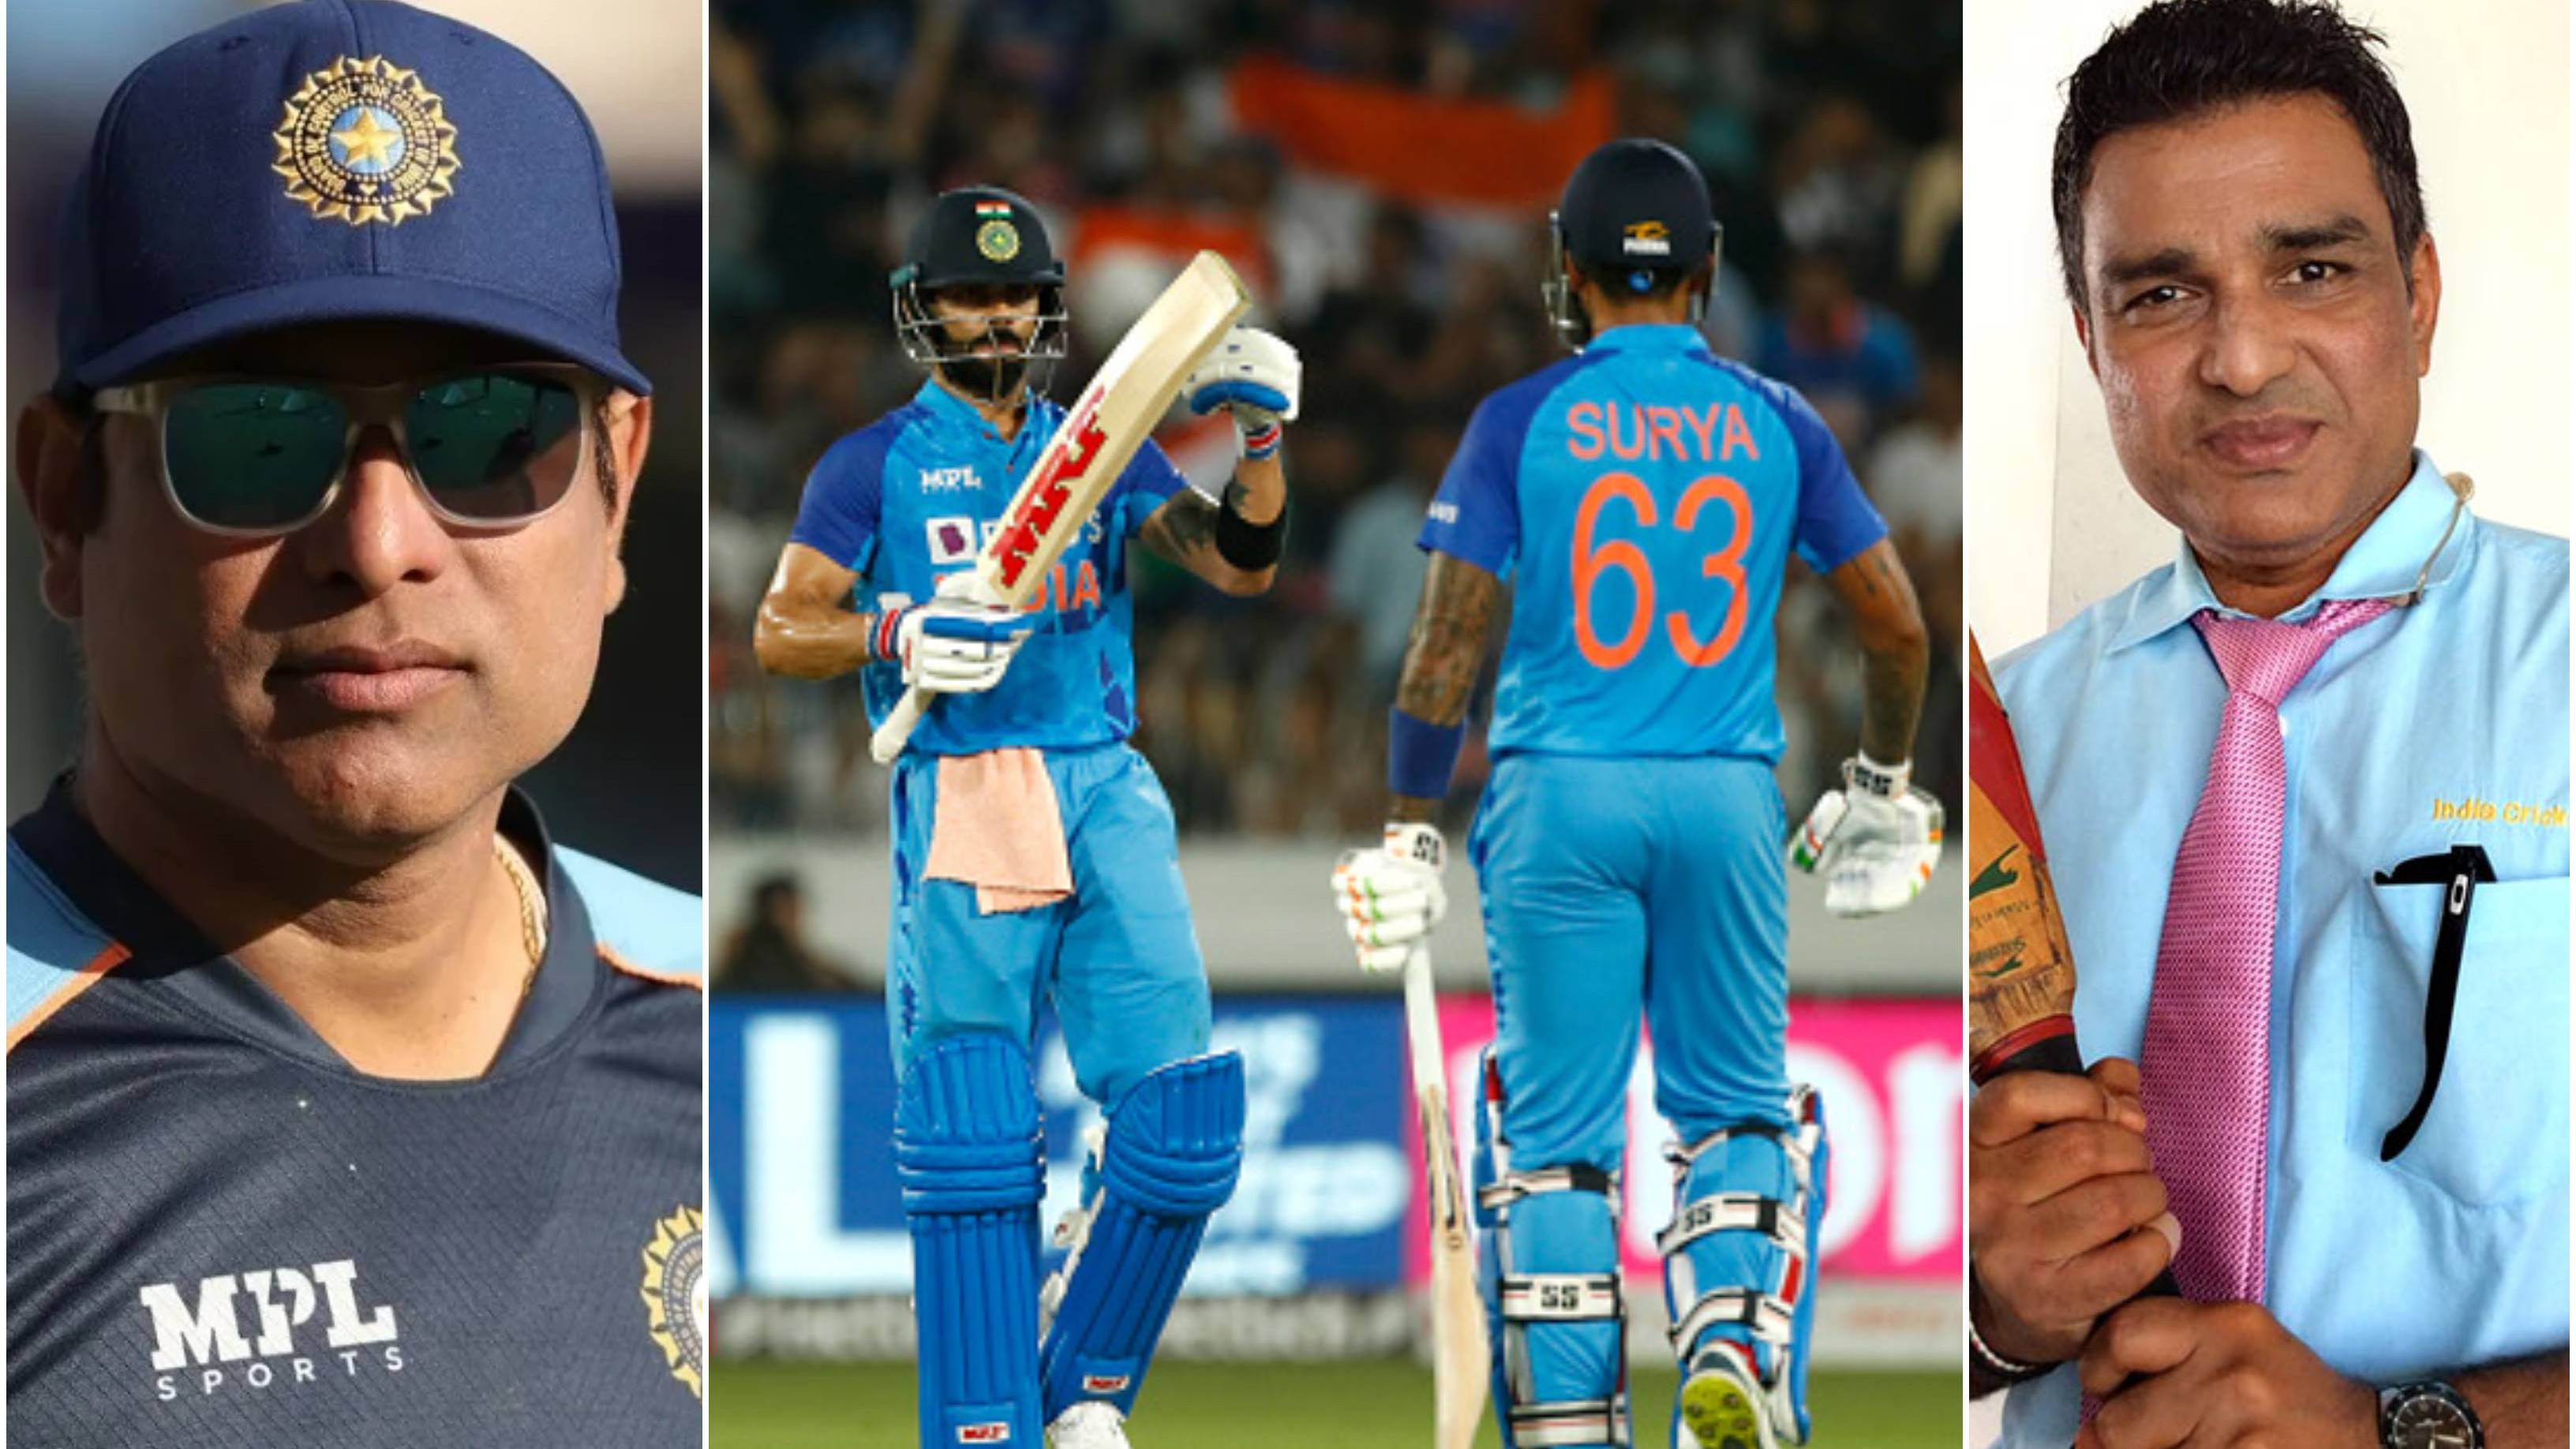 IND v AUS 2022: Cricket fraternity reacts as Suryakumar’s blitzkrieg and Kohli’s fifty power India to T20I series win